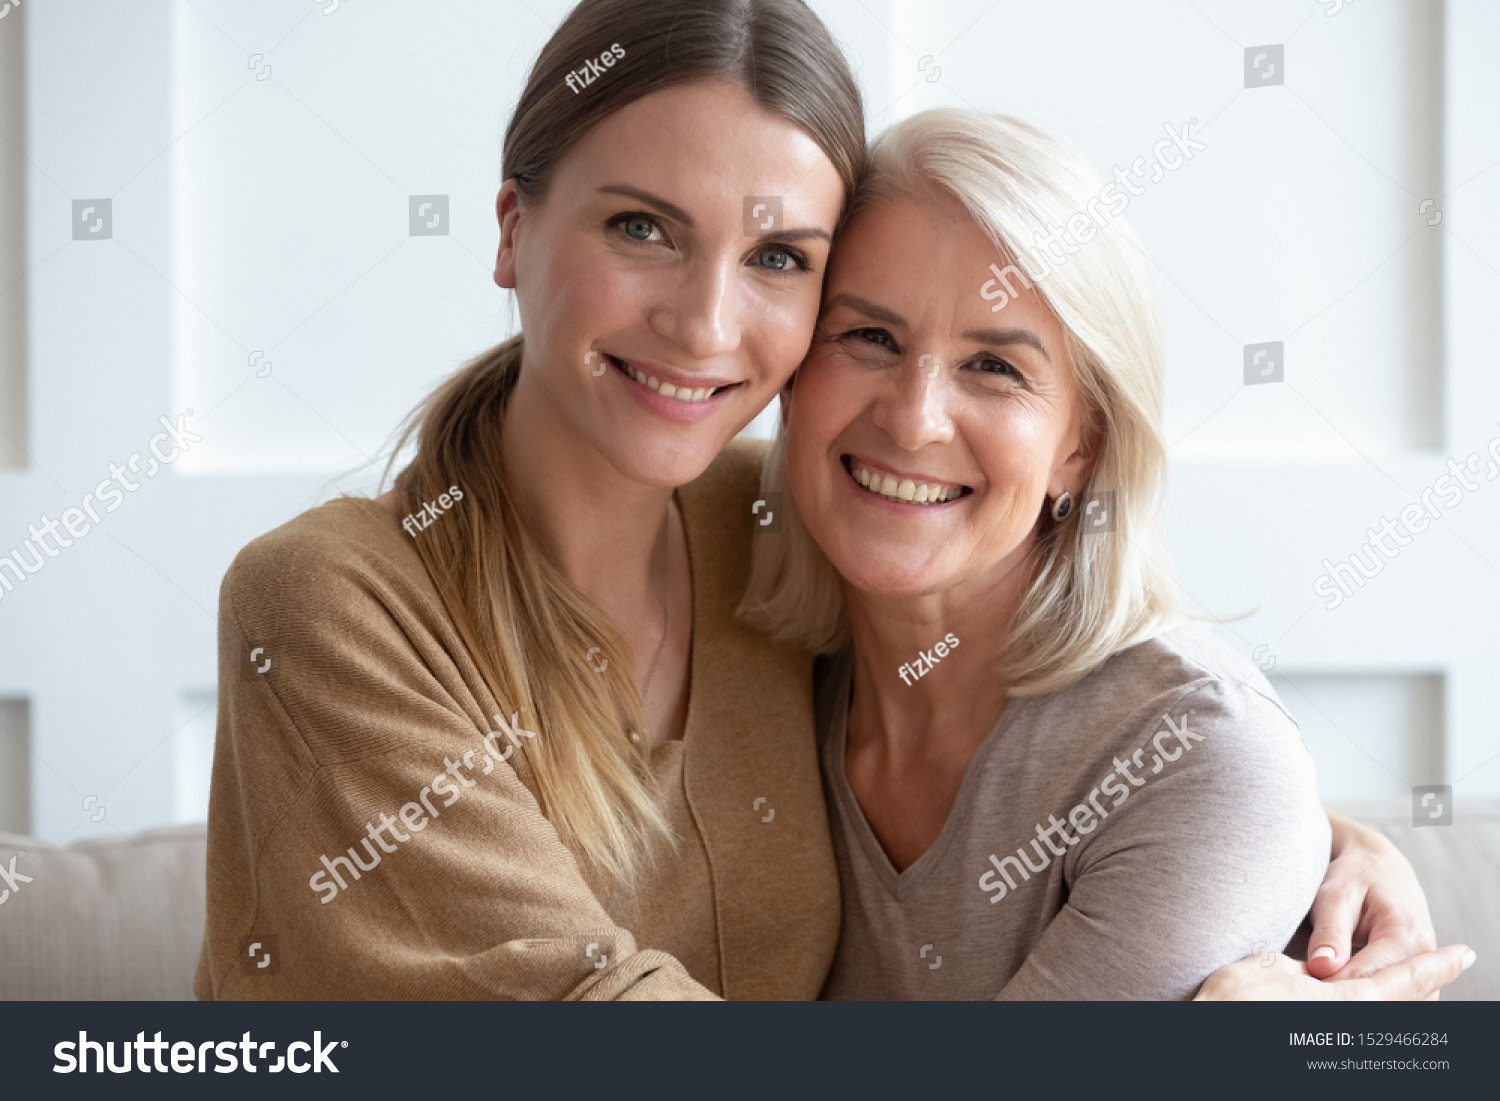 Close up image aged mother adult daughter sitting on couch indoors smiling looking posing for camera hugging feels happy spend time together, concept of love relative people, multi-generational family #1529466284